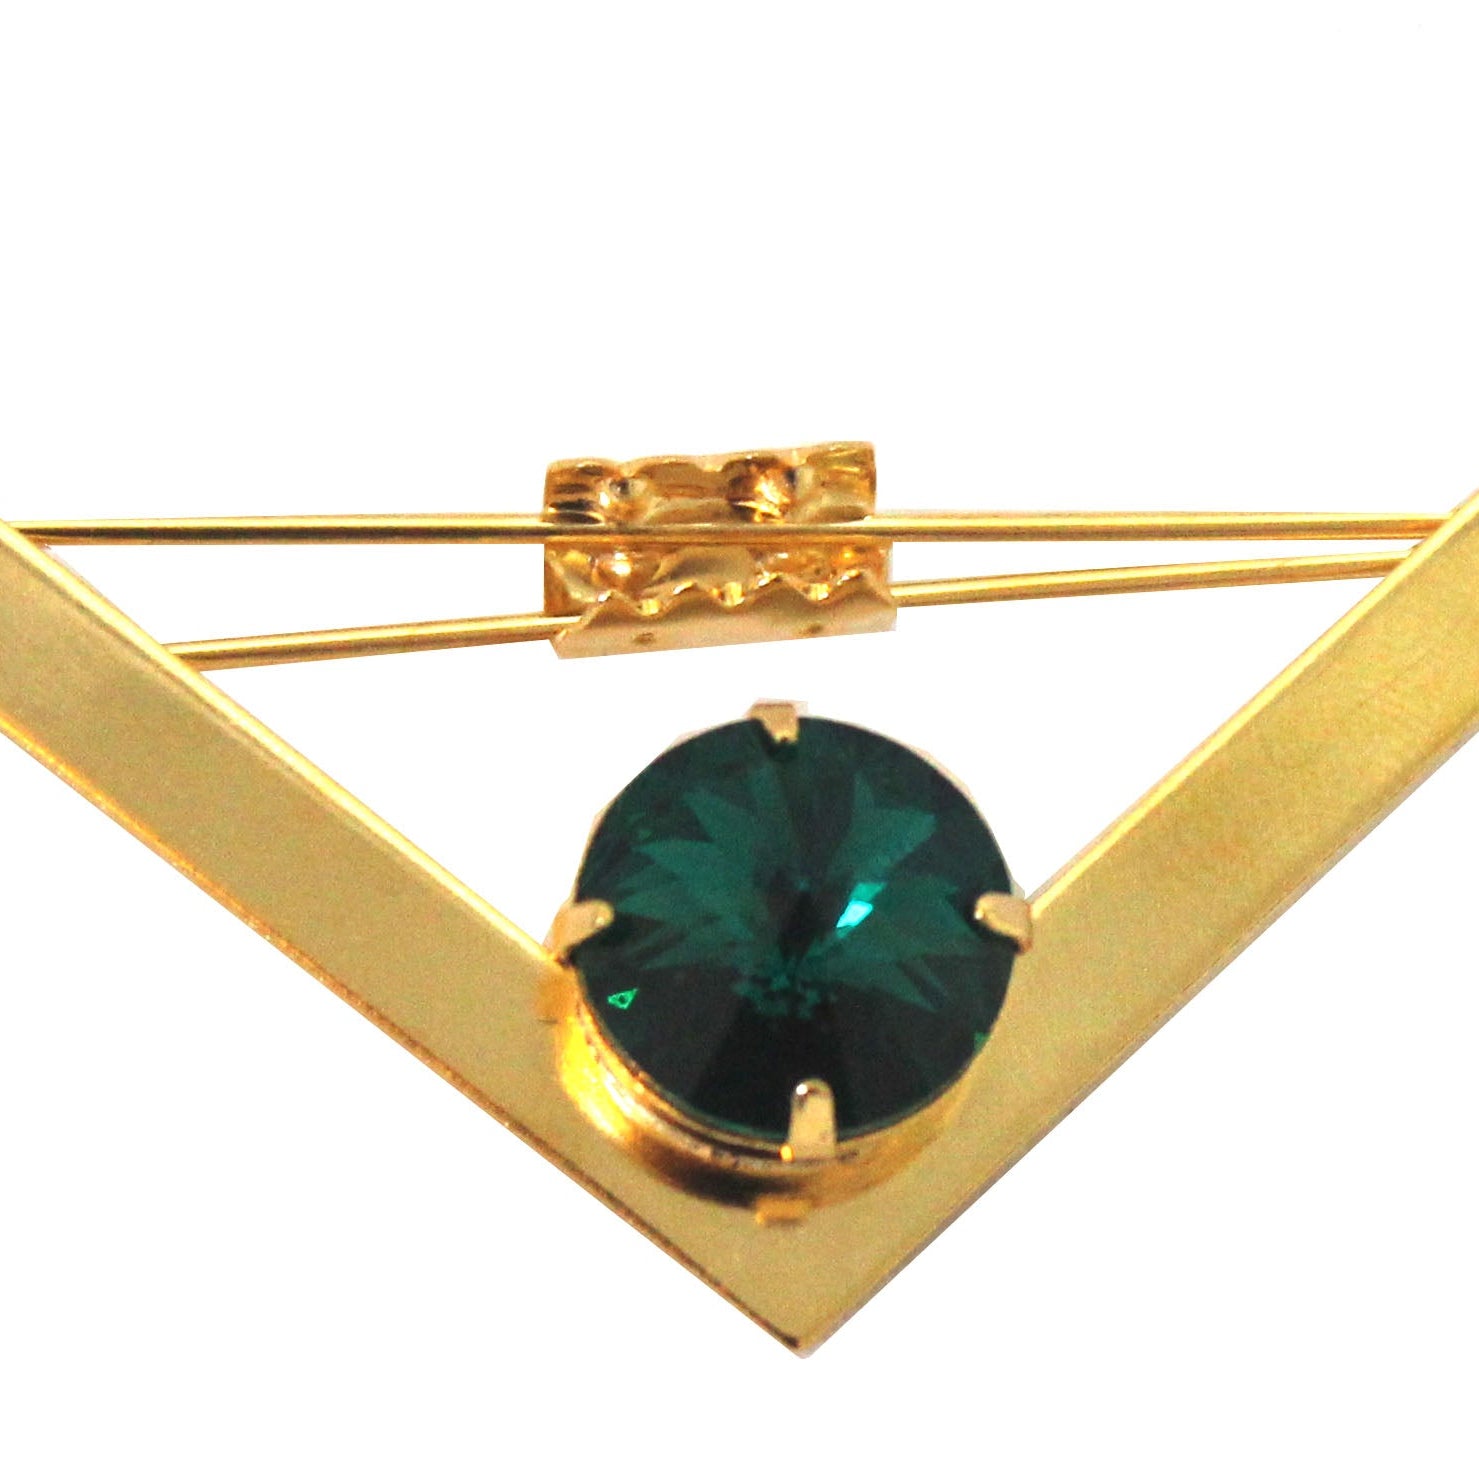 BIRTHSTONE BARRETTE - Epona Valley | Luxury Hair Accessories | Bridal Accessories | Made In NYC